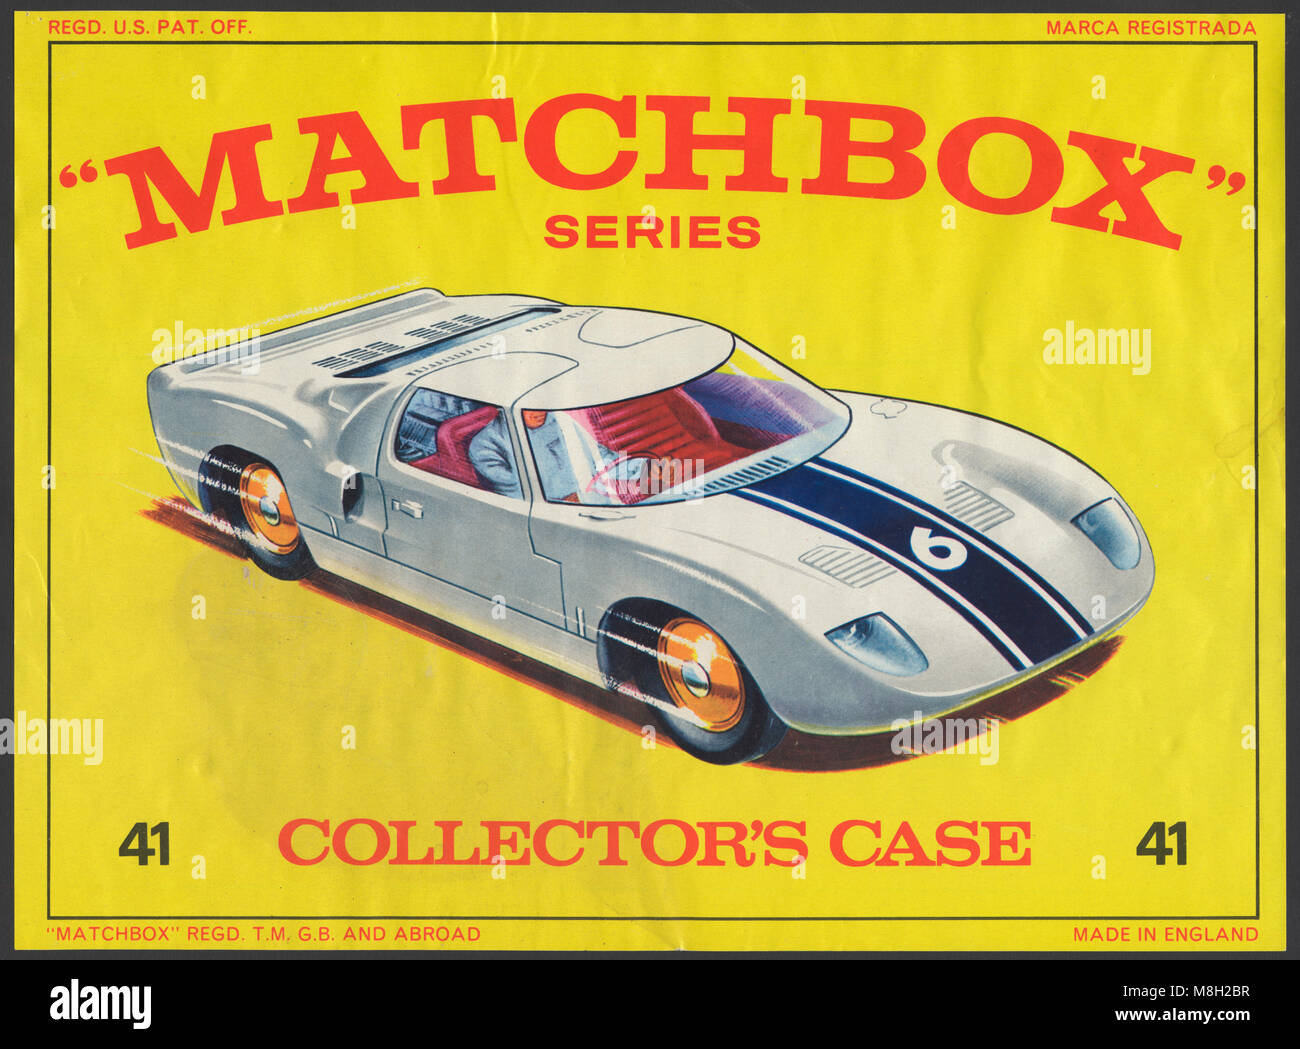 Matchbox Series diecast toy car carrying case front.  Features Lesney Matchbox artwork from the Sixties of a Ford GT40.  Issued in 1966, this model was Matchbox's best selling model of the time.  The carry case was designed to hold a couple of dozen models inside. Stock Photo